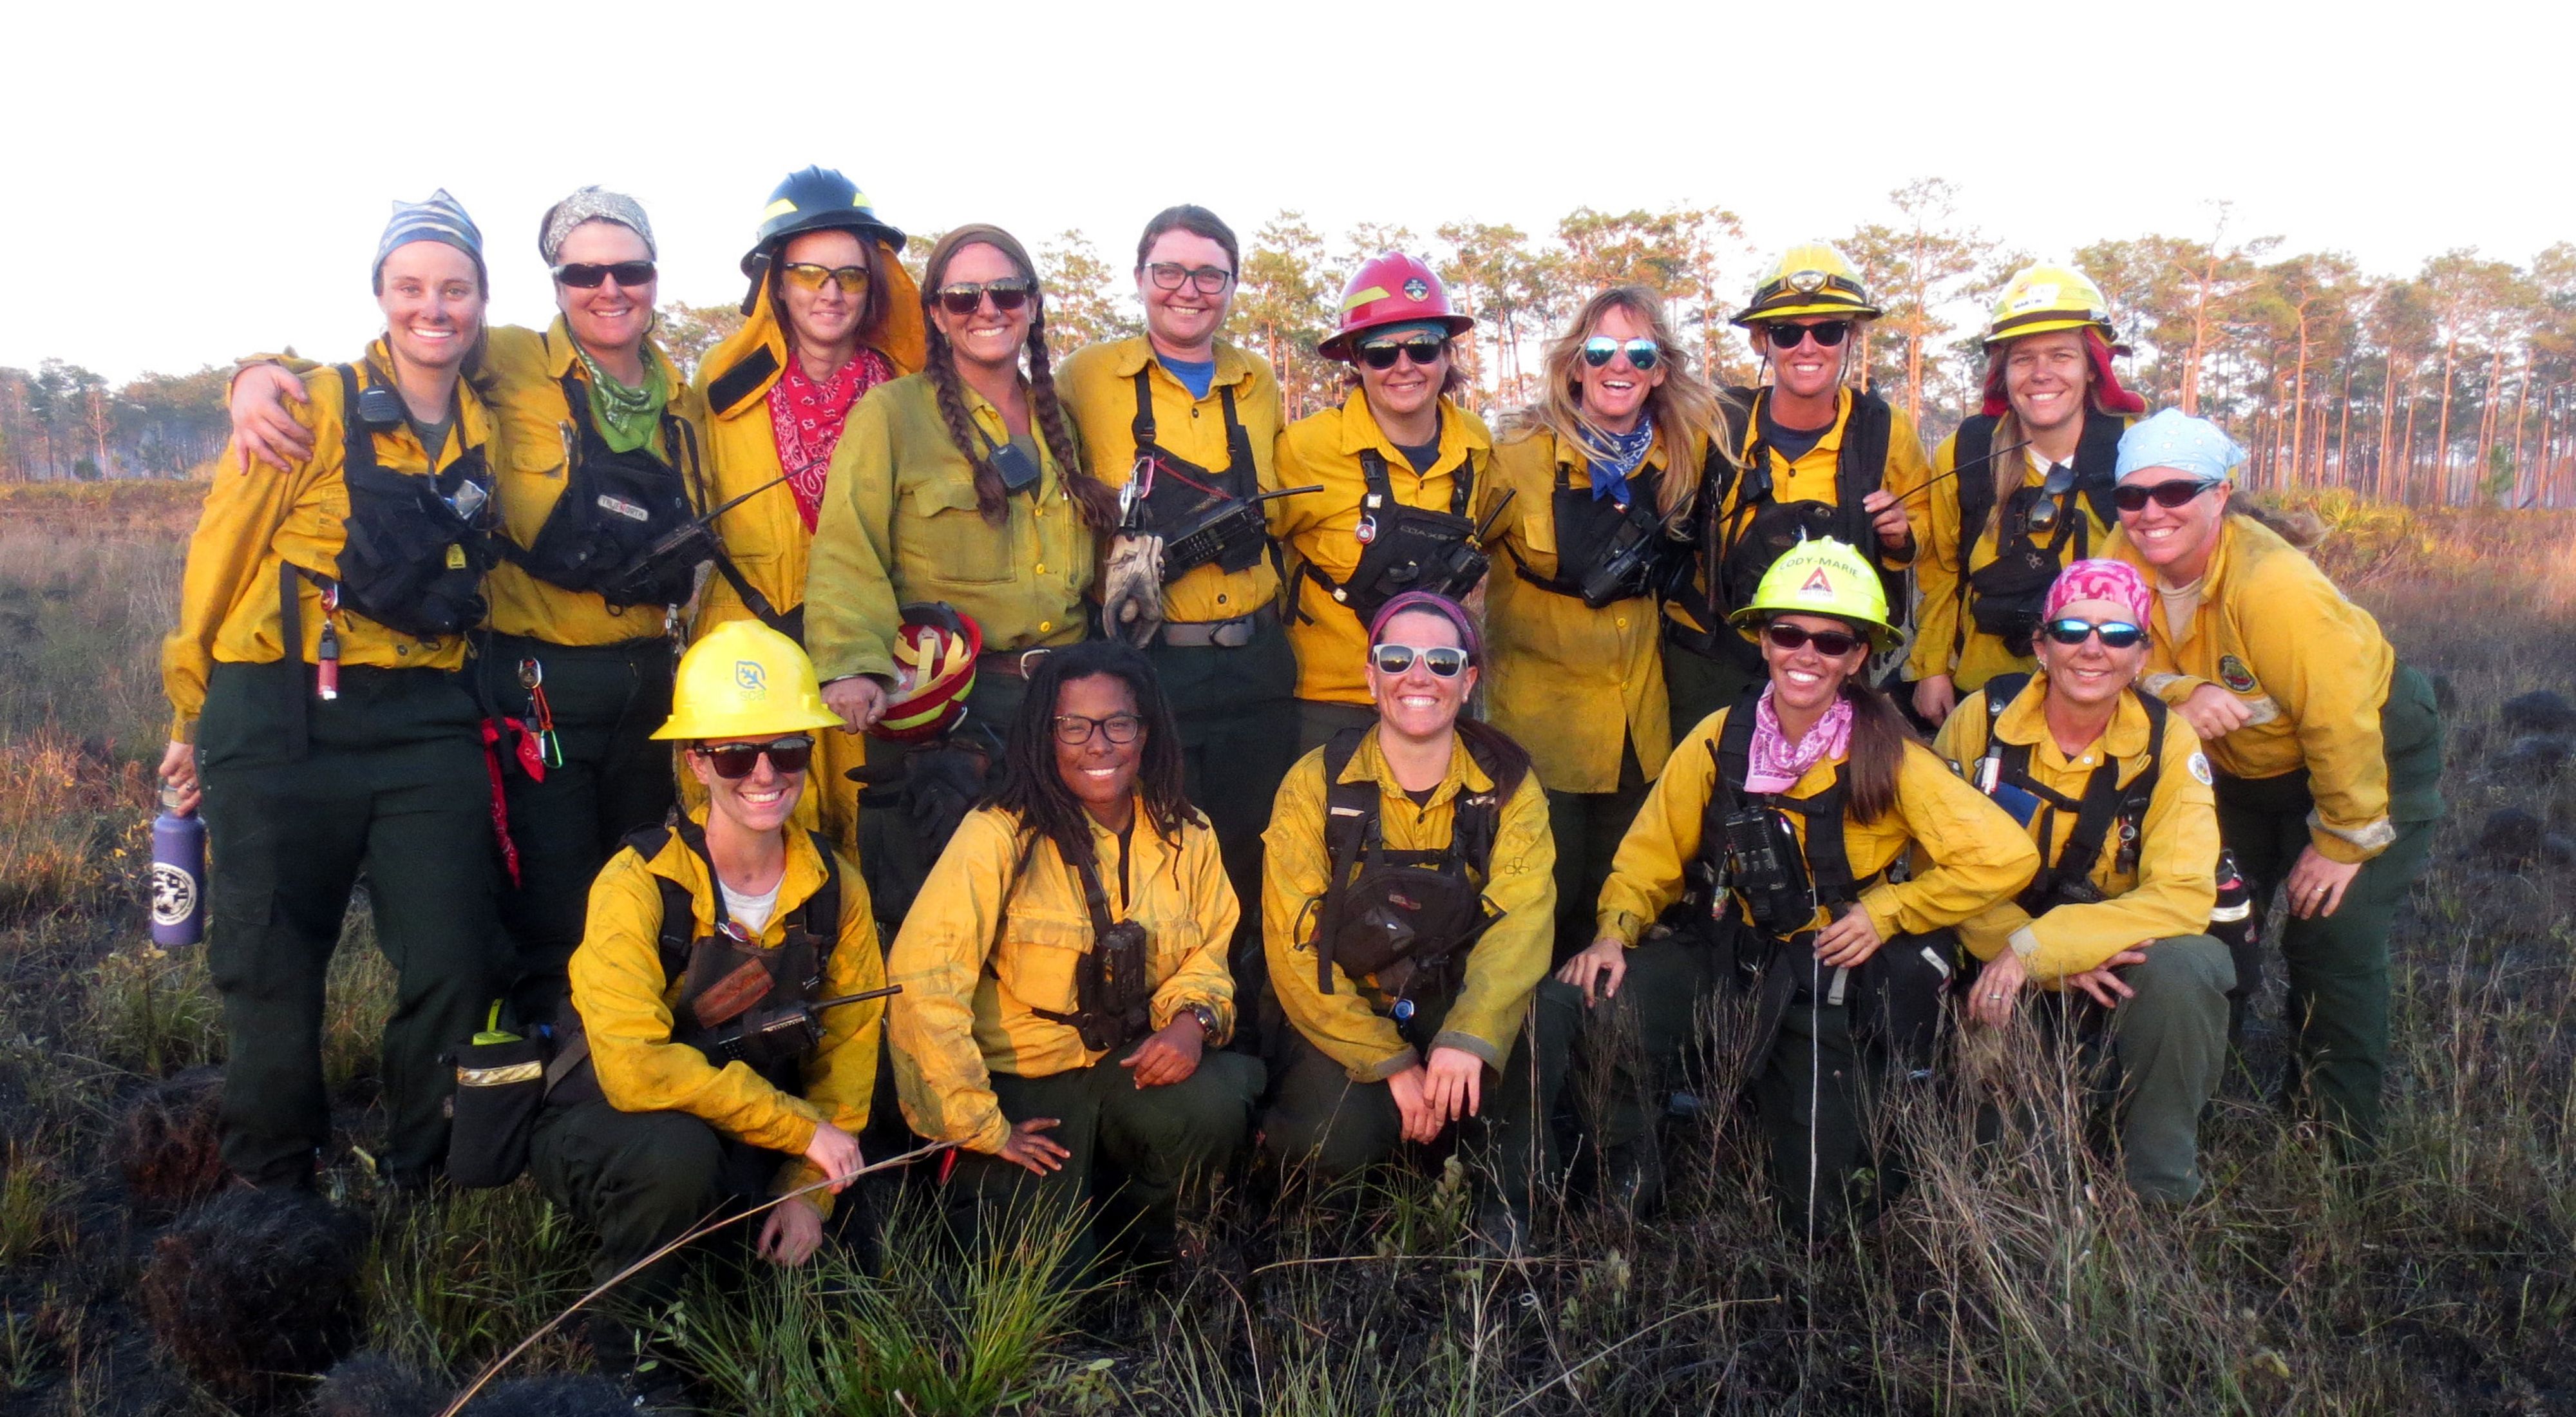 A group of about 15 smiling women in fire gear.